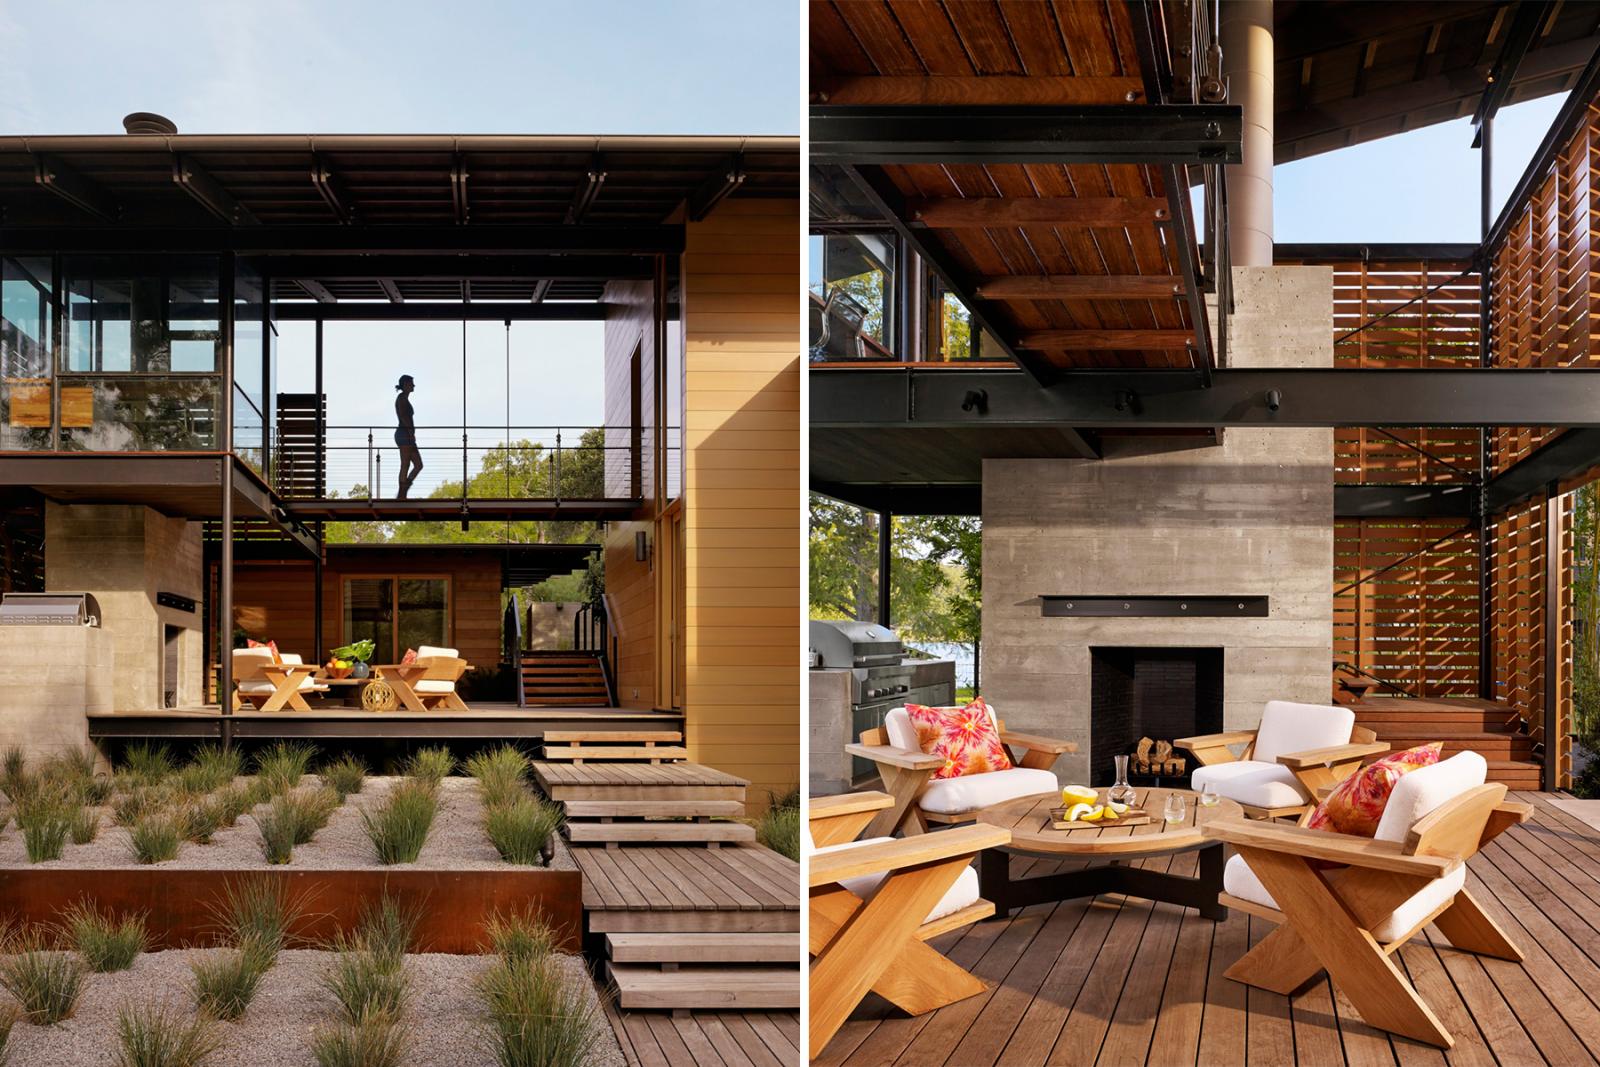 A two-story living area, with a treetop level master bedroom loft and “crow’s nest” office, allow the house to be both intimate and social, effortlessly engaging guests and owners